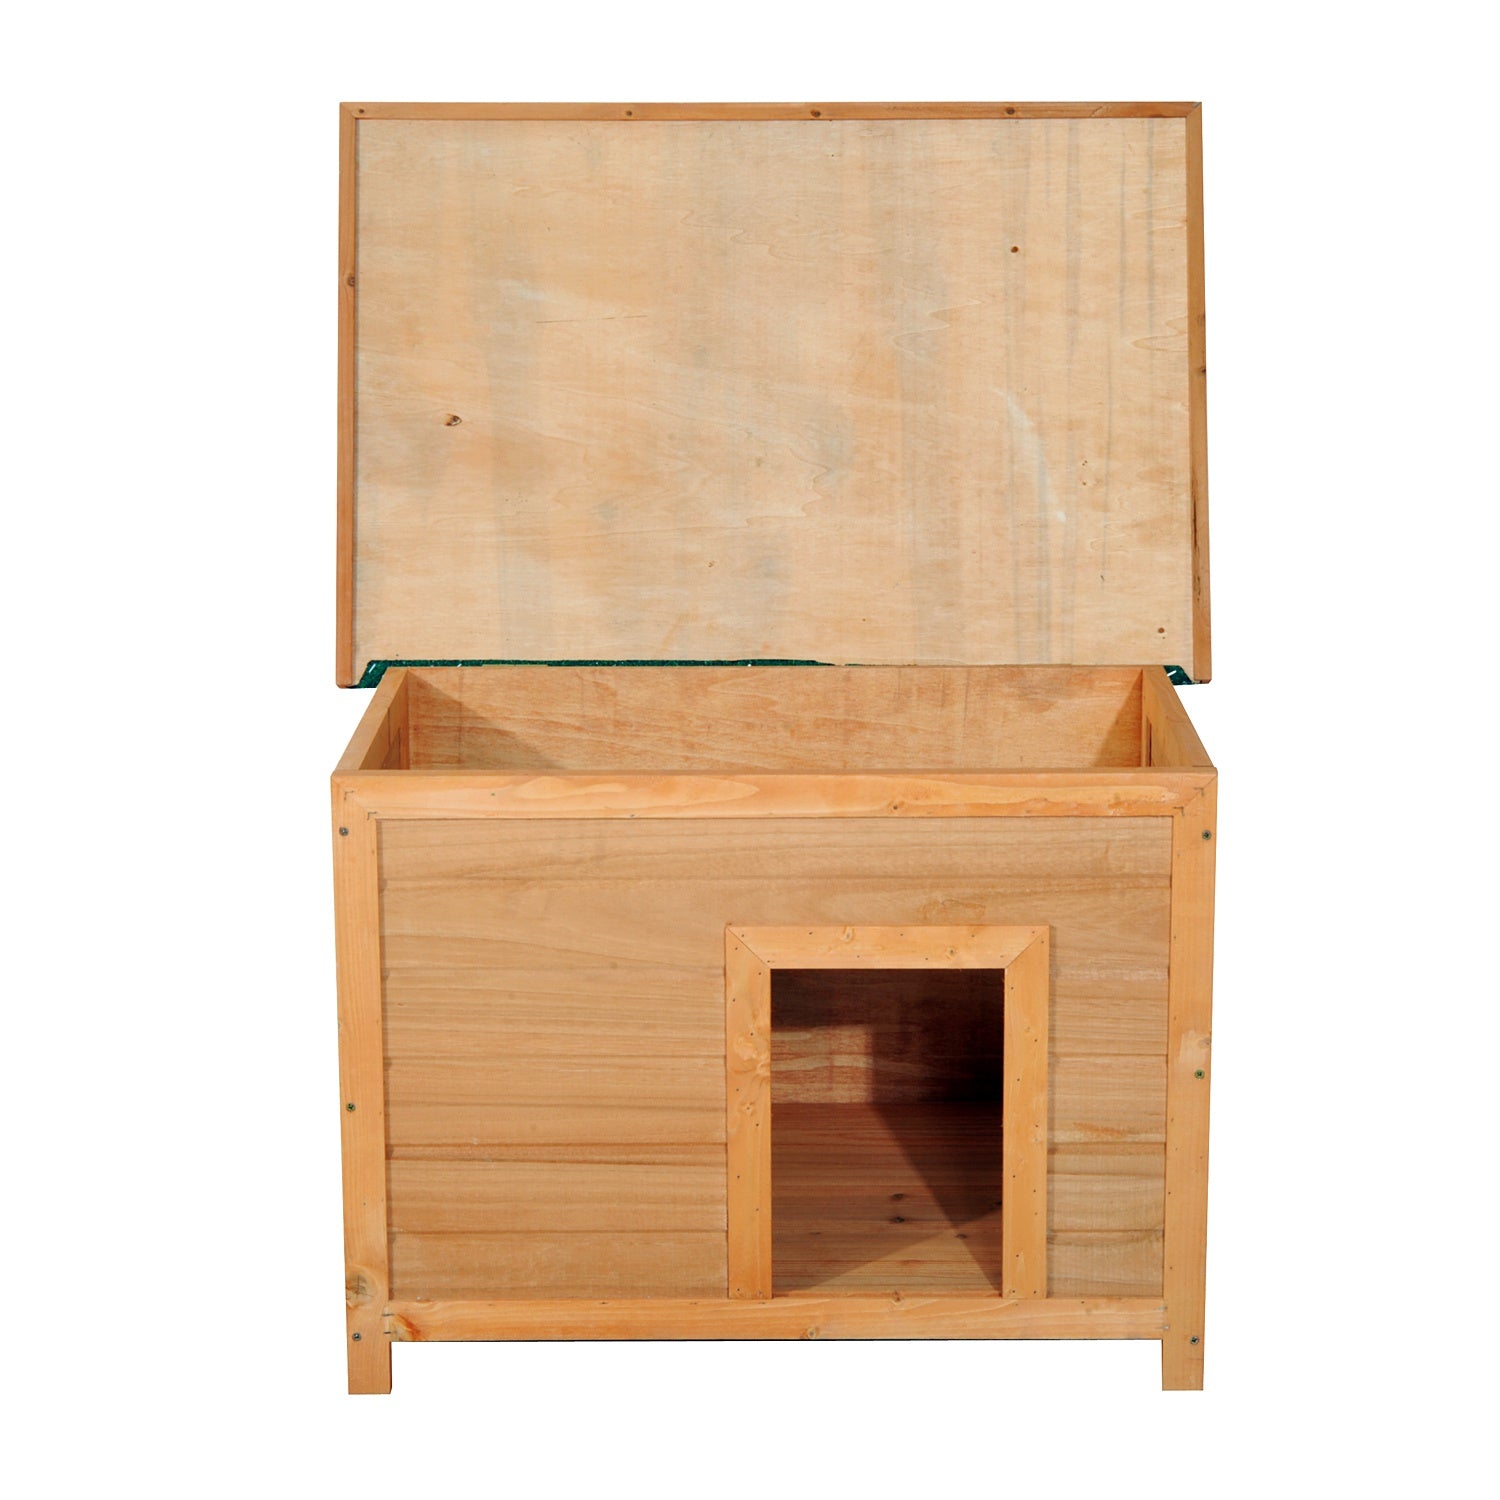 85Wx58Dx58H cm Waterproof Elevated Dog Kennel-Wooden